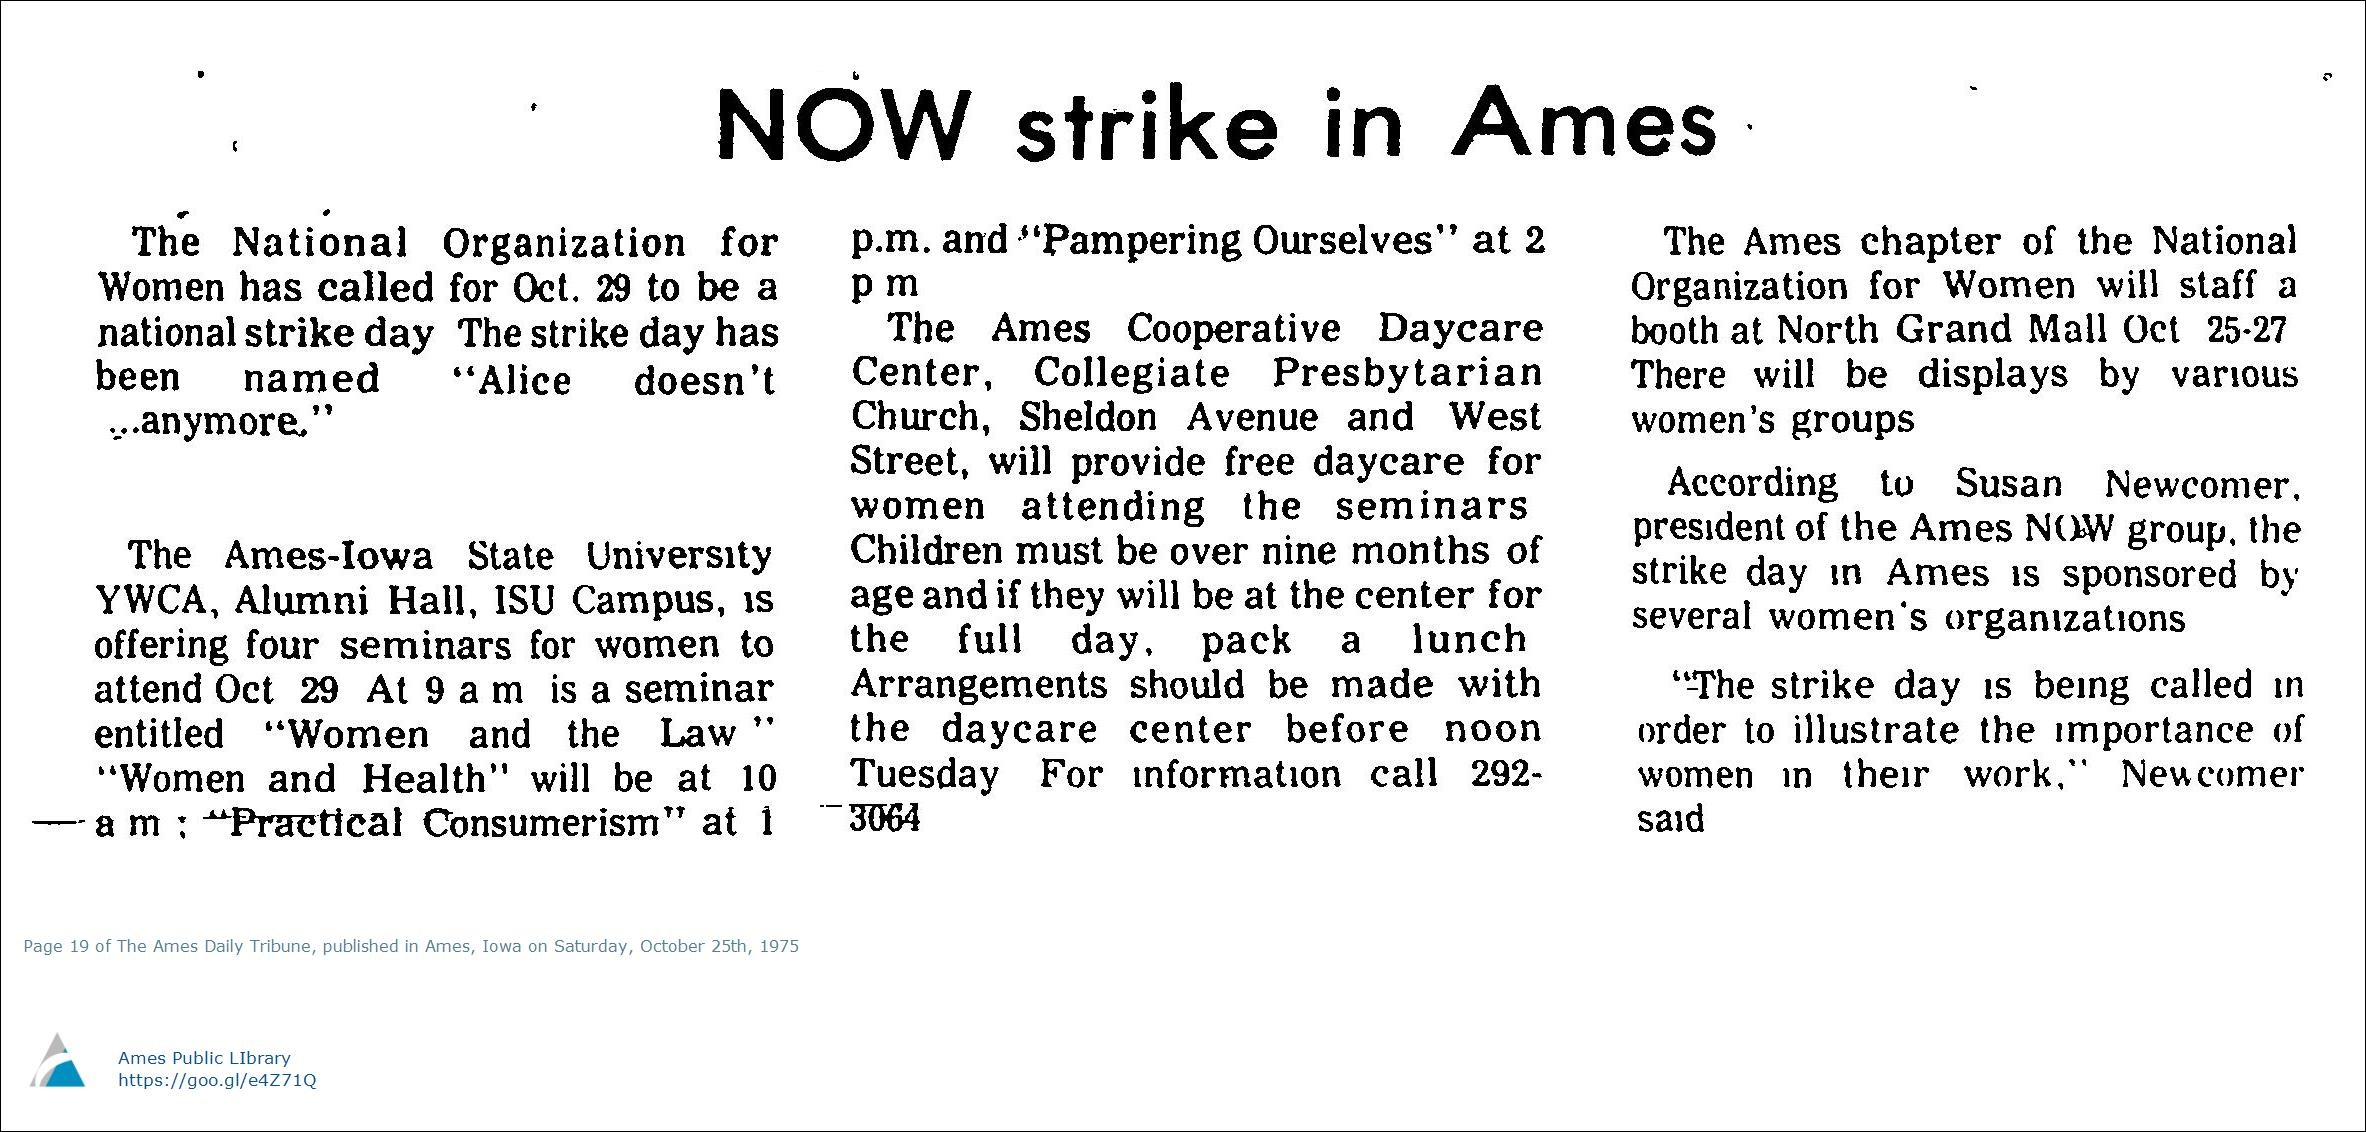 Image from page 19 of the Ames Daily Tribune, October 25th, 1975.